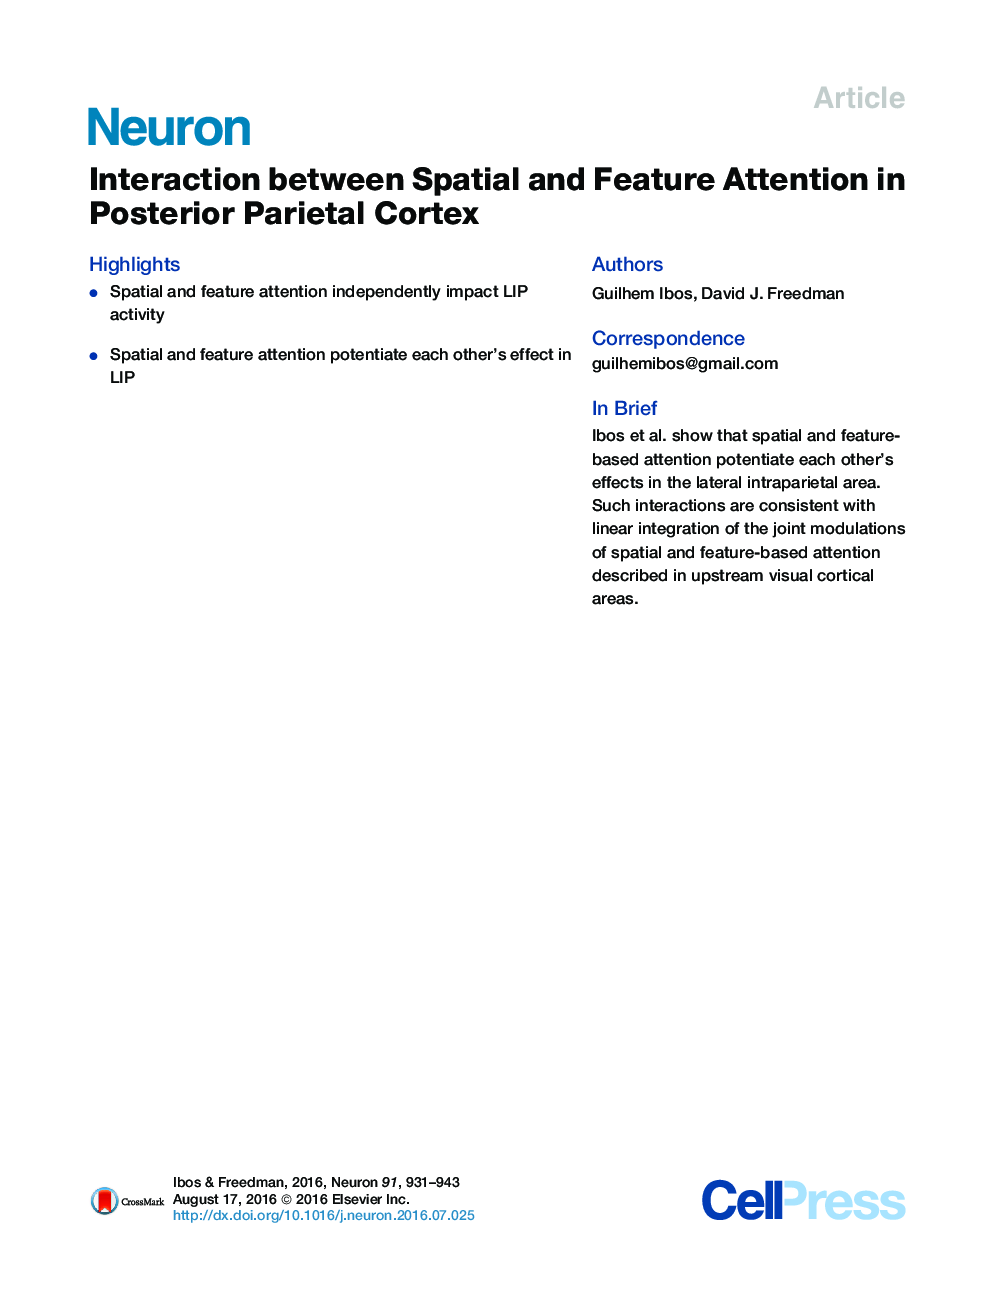 Interaction between Spatial and Feature Attention in Posterior Parietal Cortex